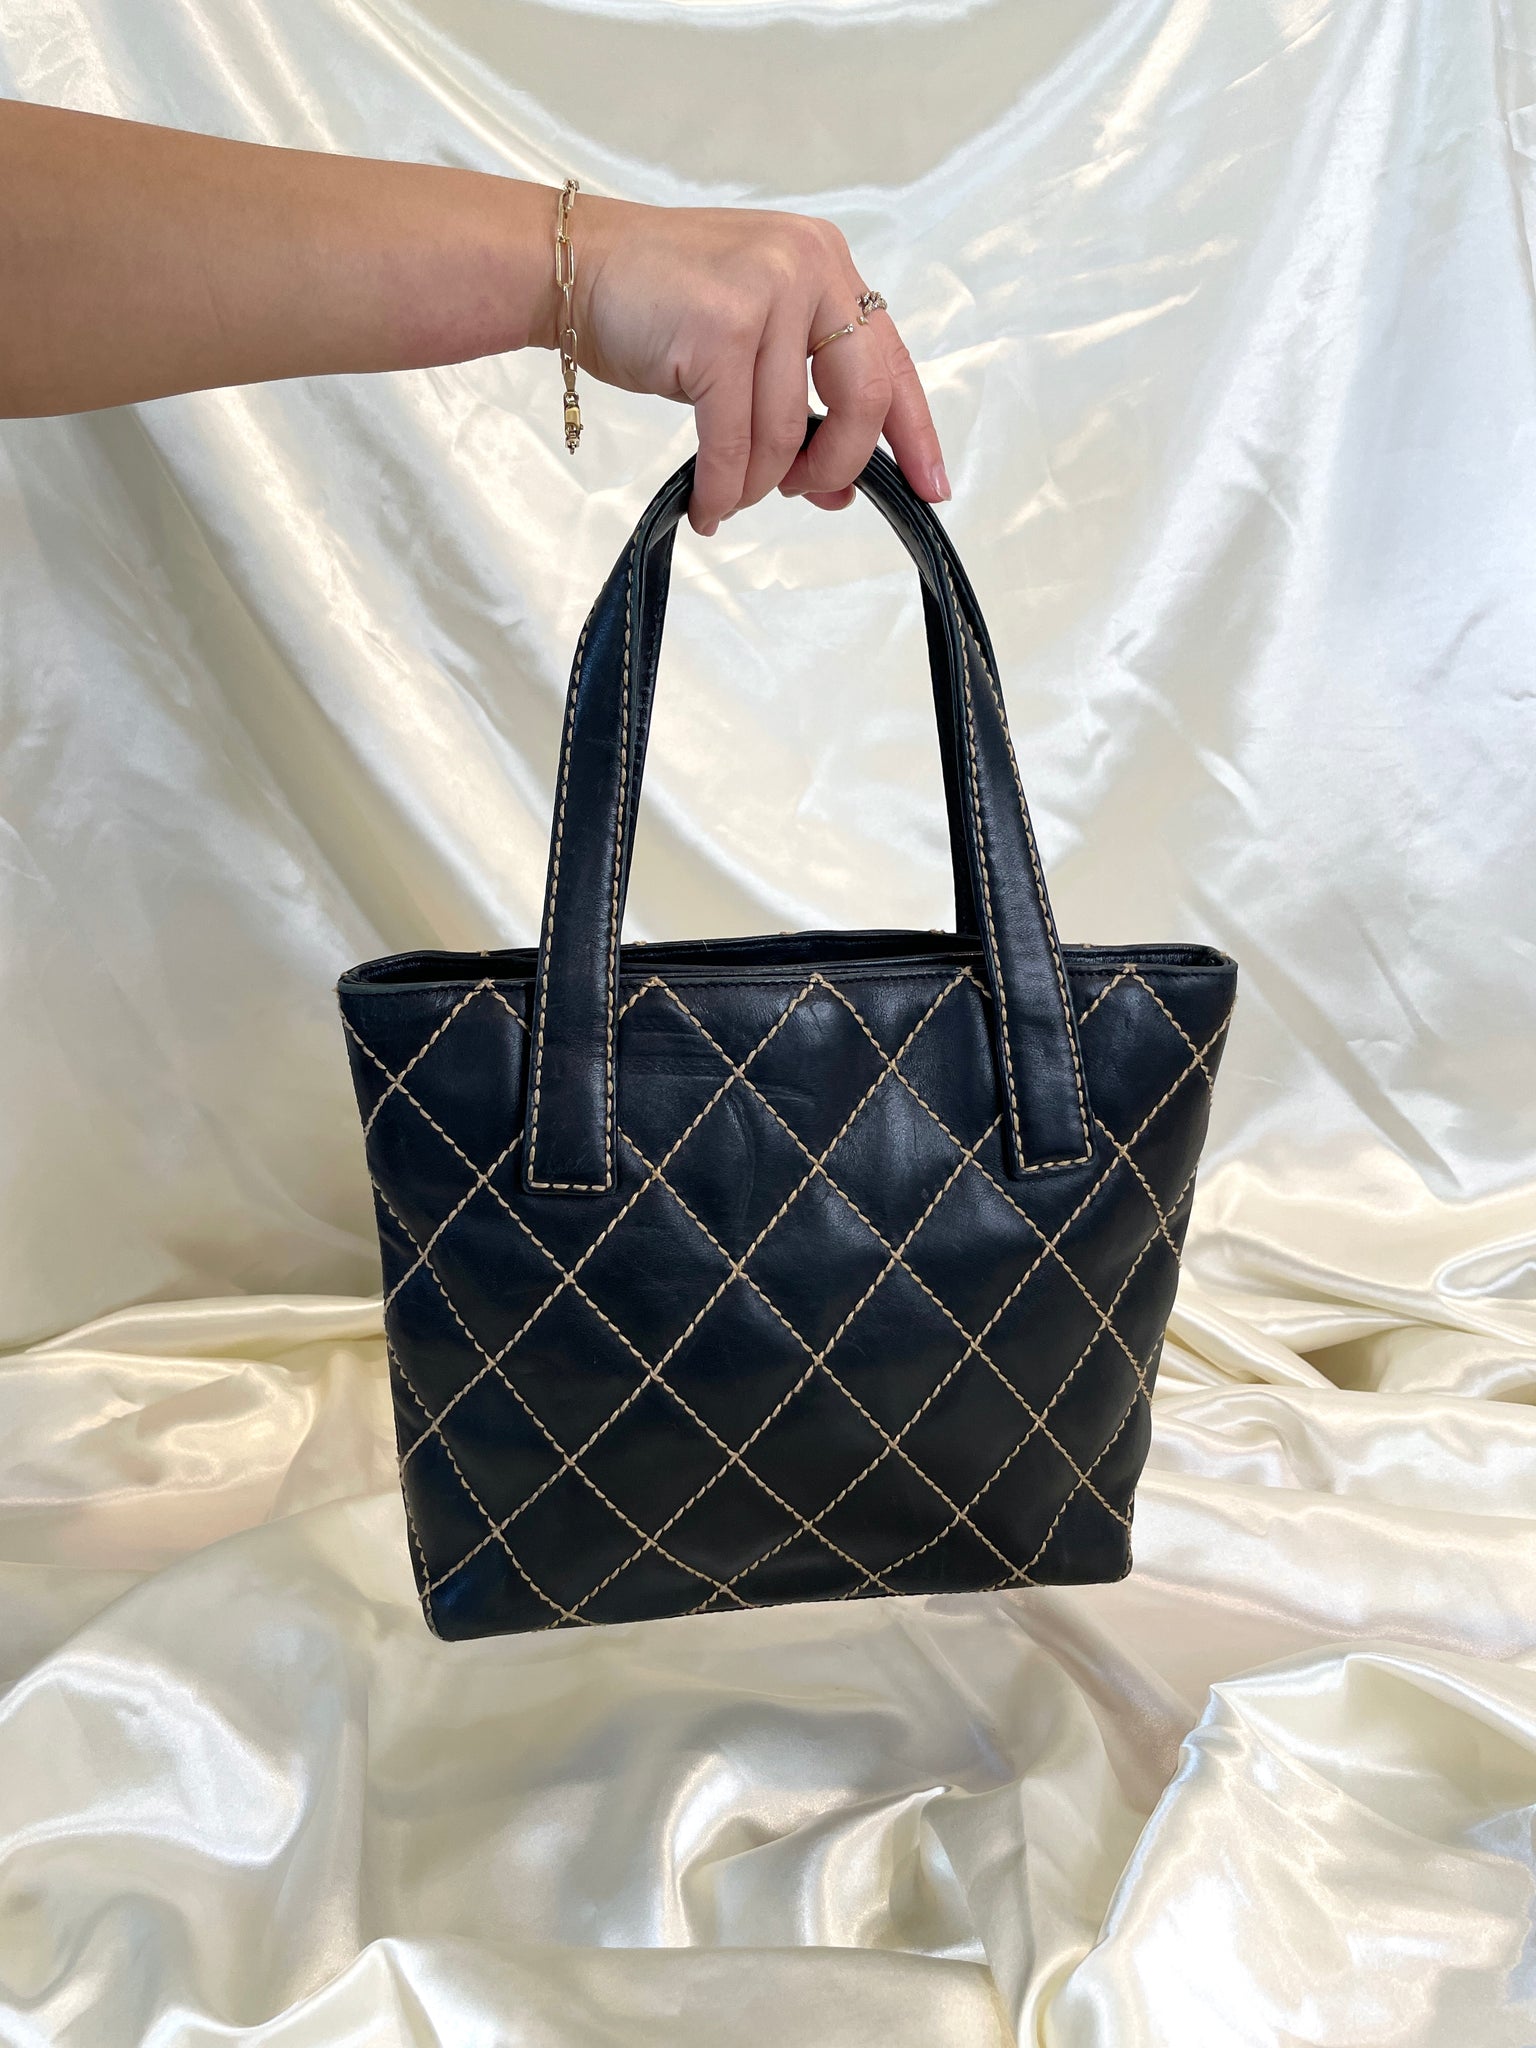 Chanel Black Chevron Quilted Iridescent Leather Surpique Small Tote Bag -  Yoogi's Closet